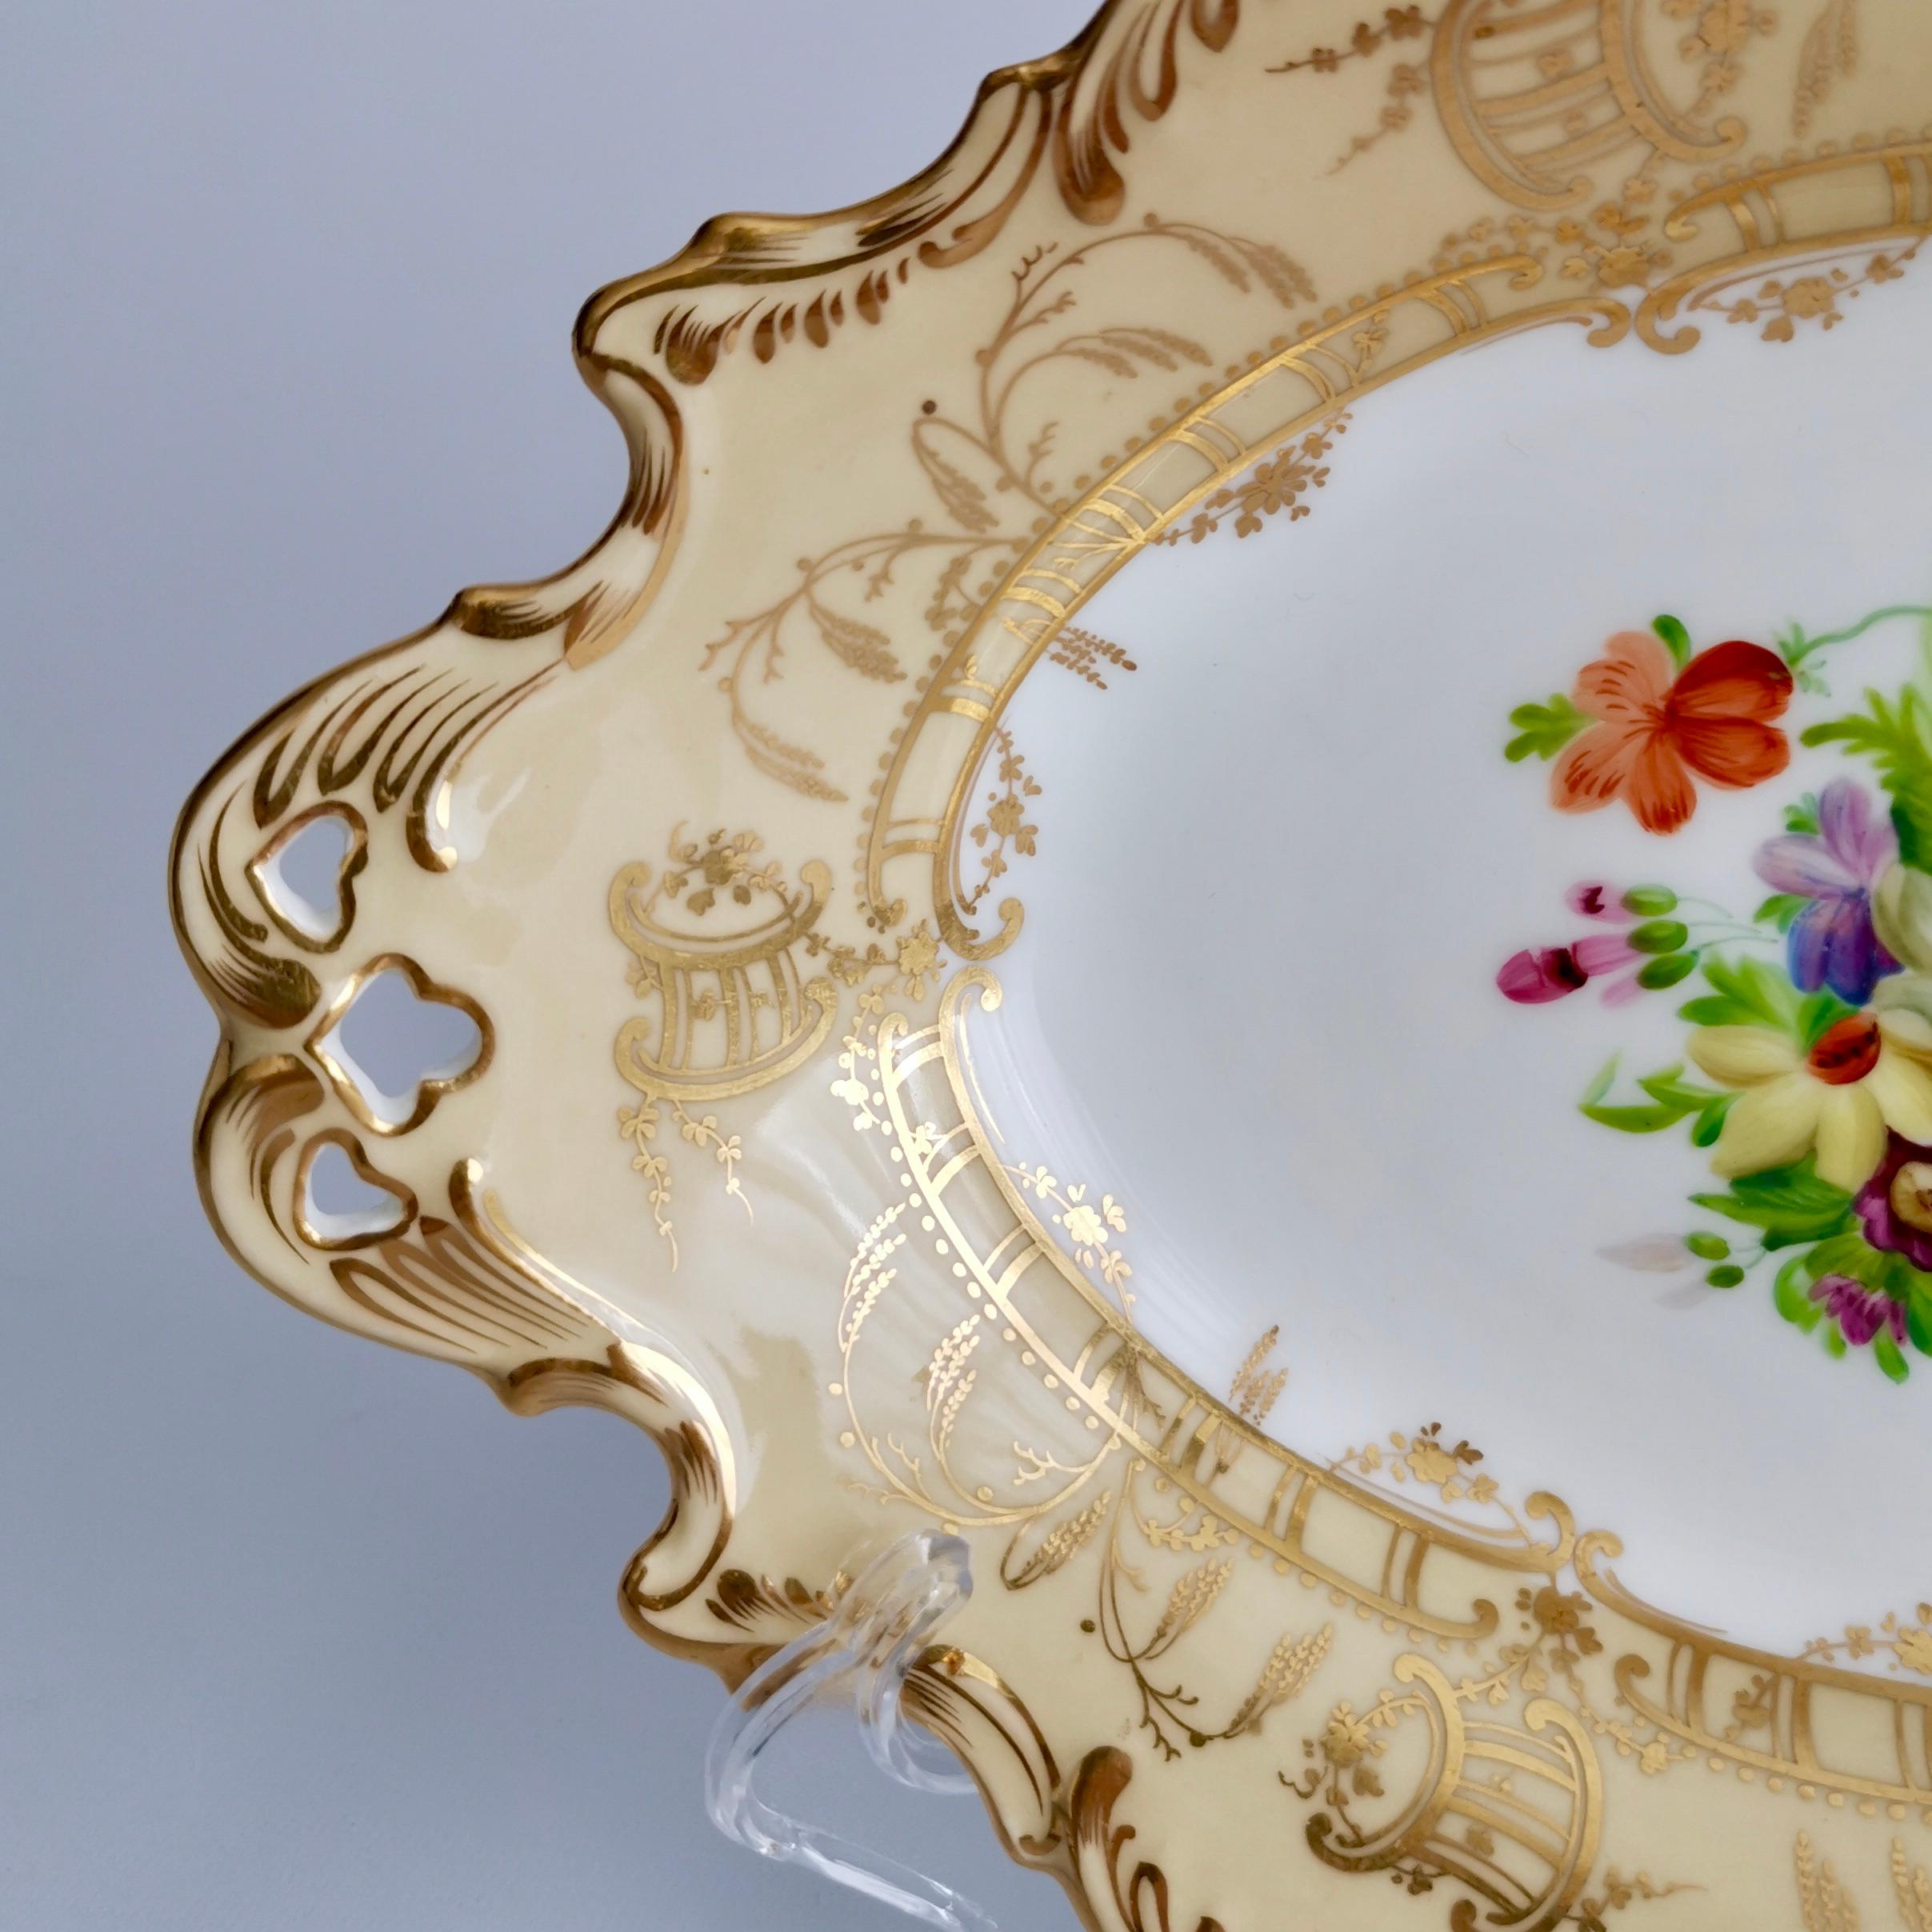 Mid-19th Century Coalport Set of 2 Oval Dessert Dishes, Beige with Flowers by Thomas Dixon, 1847